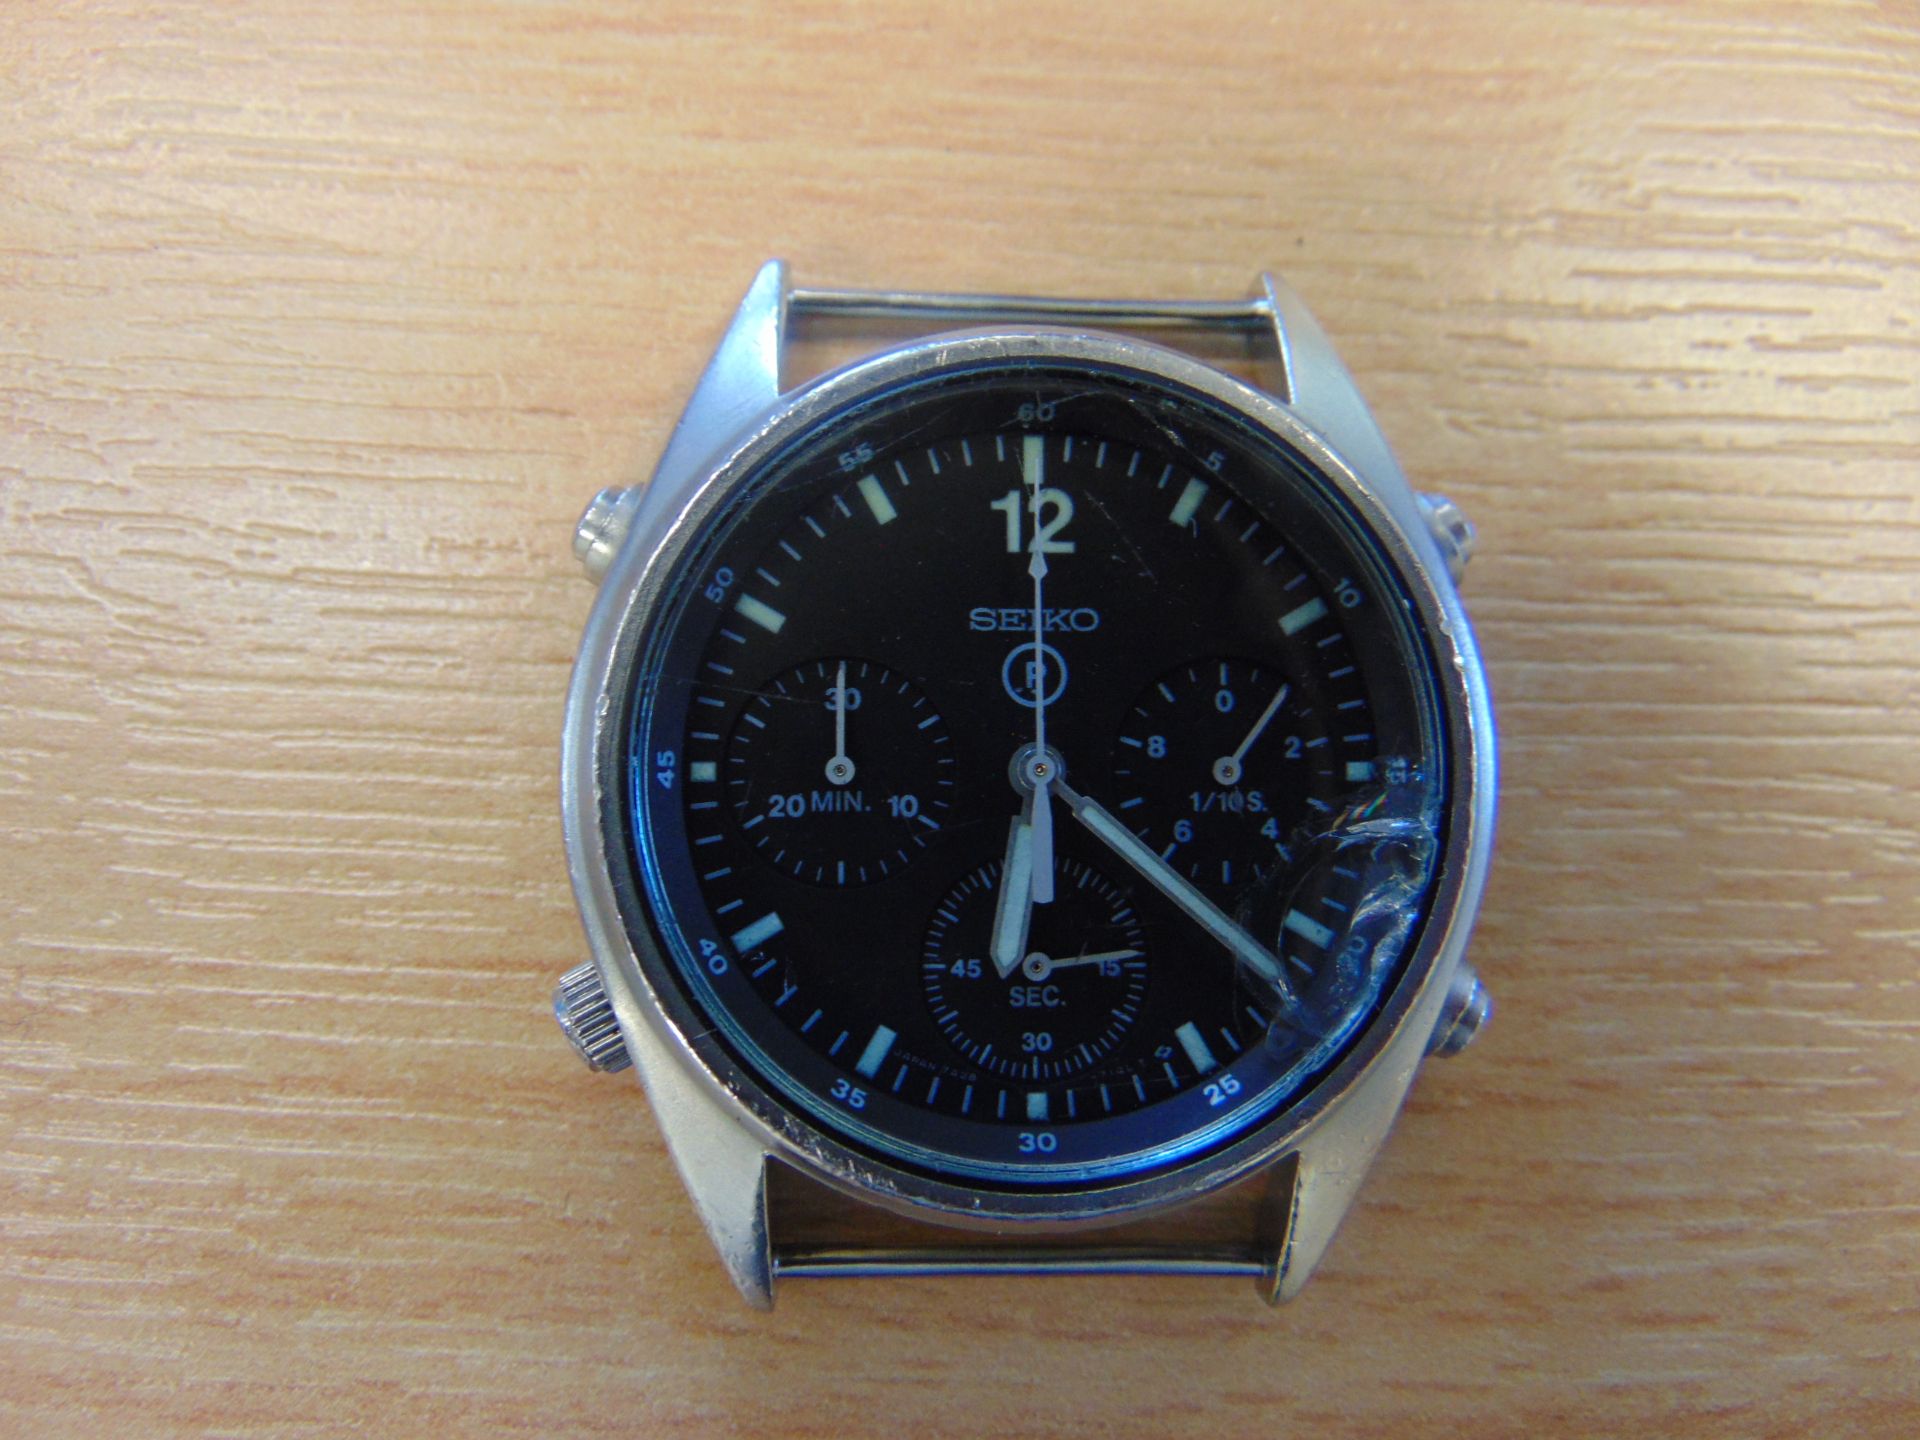 Seiko Gen 1 Pilots Chrono RAF Harrier Force Issue with Nato Marks, Date 1989 - Image 4 of 6